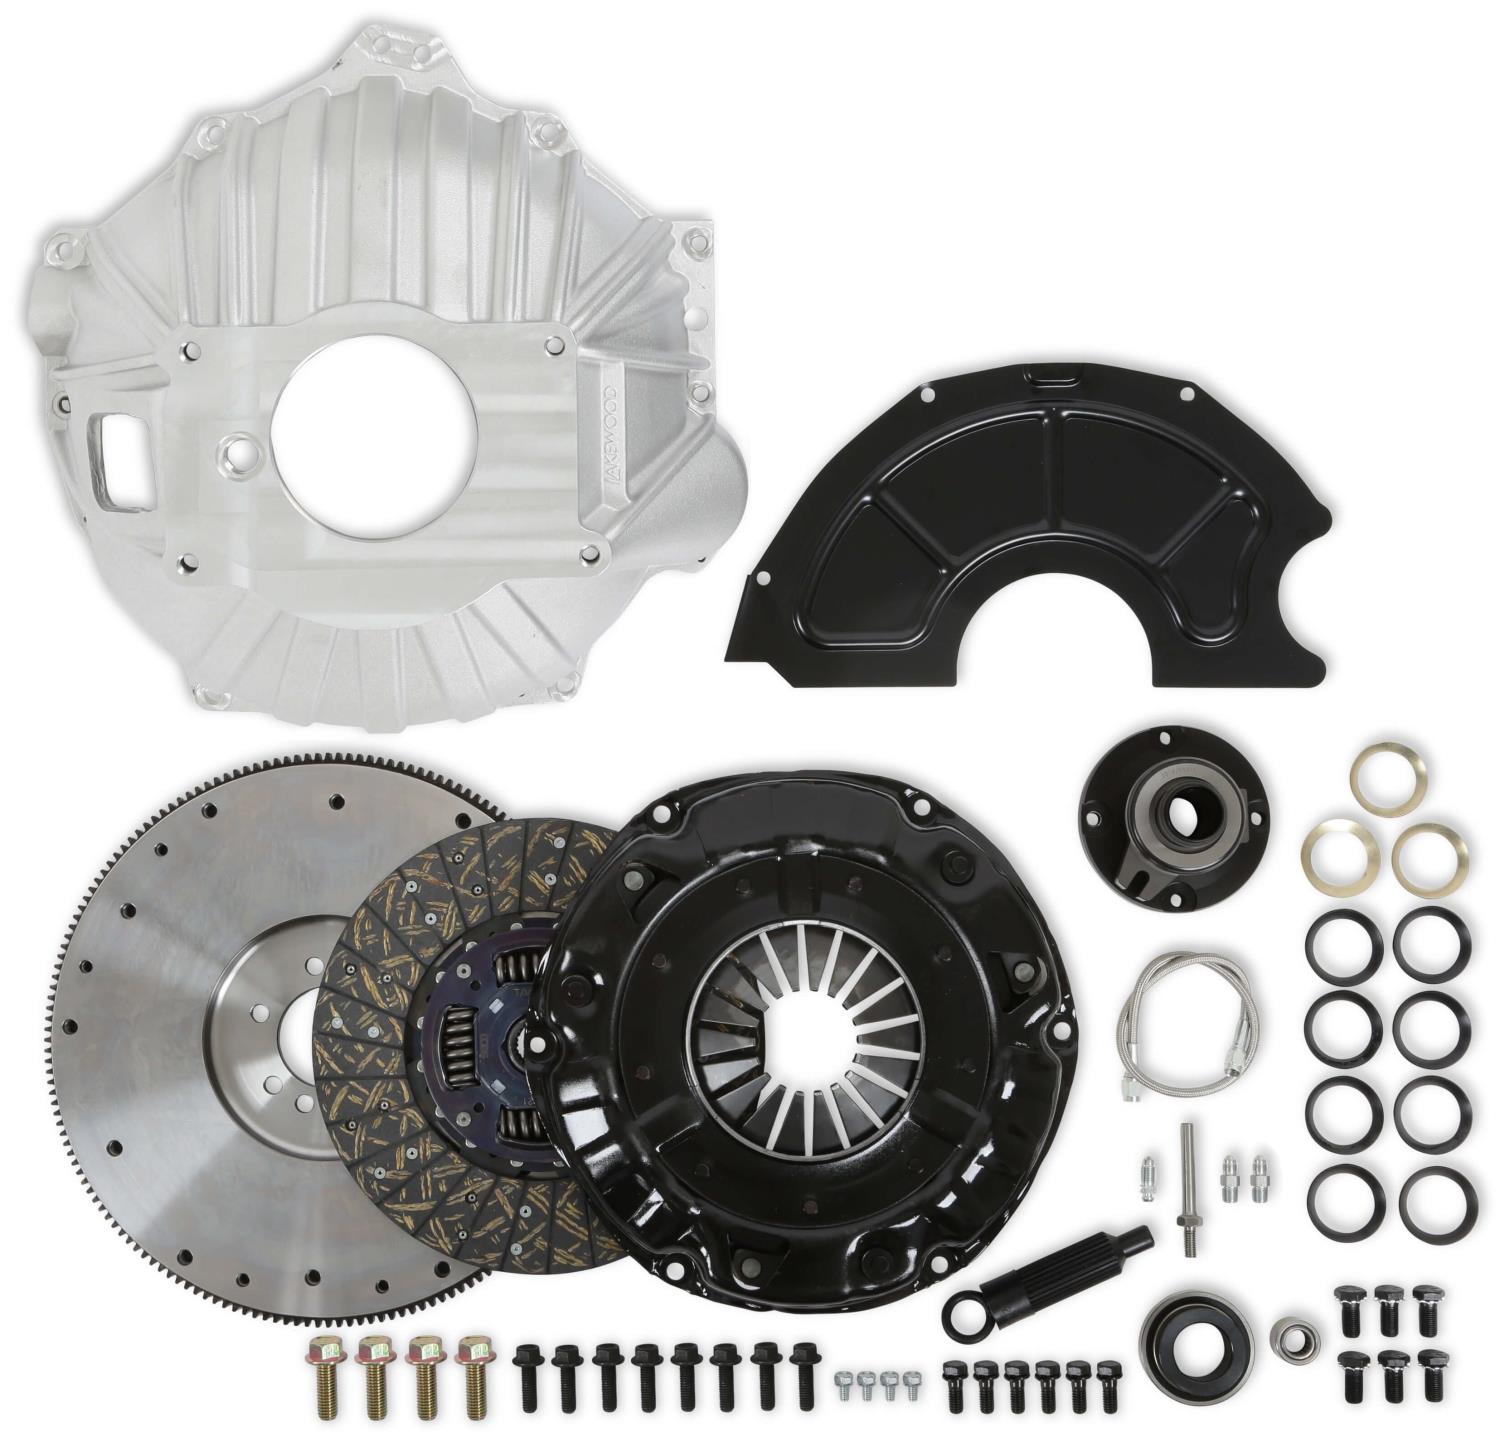 TKO, TKX Transmission Installation Kit for 1955-1985 Chevy Small and Big Block Engines